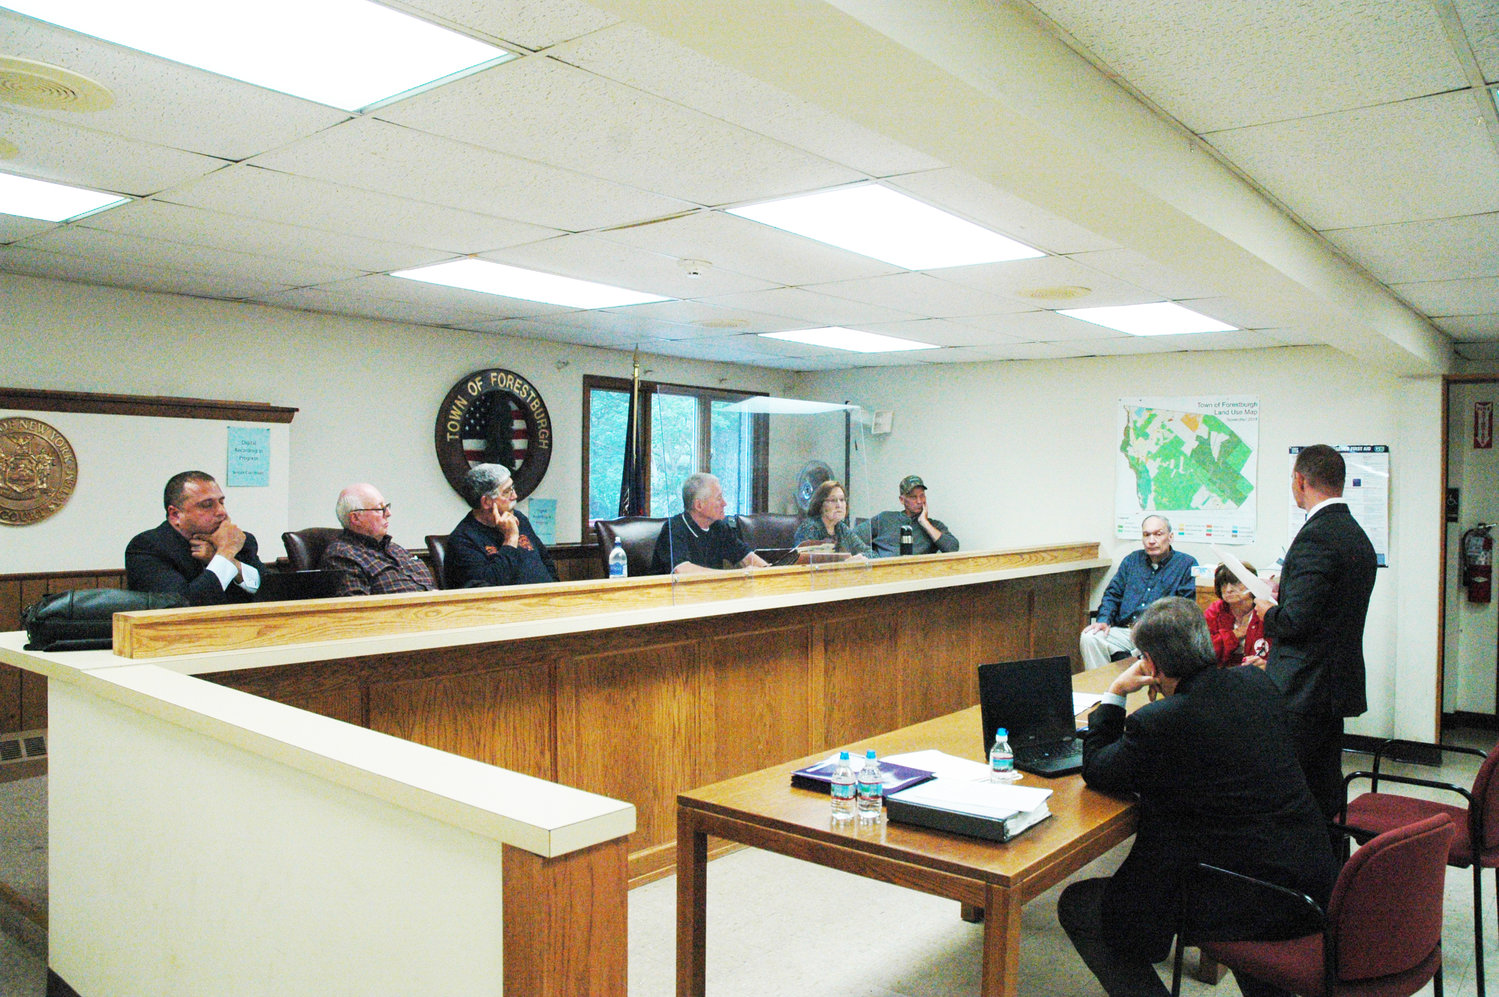 The evidentiary hearing regarding the denial of building permit for Lost Lakes Holdings LLC, which began on May 31, resumed with Town of Forestburgh Building Inspector and Code Enforcement Officer Glenn Gabbard giving his testimony before the Town’s Zoning Board of Appeals on Wednesday.